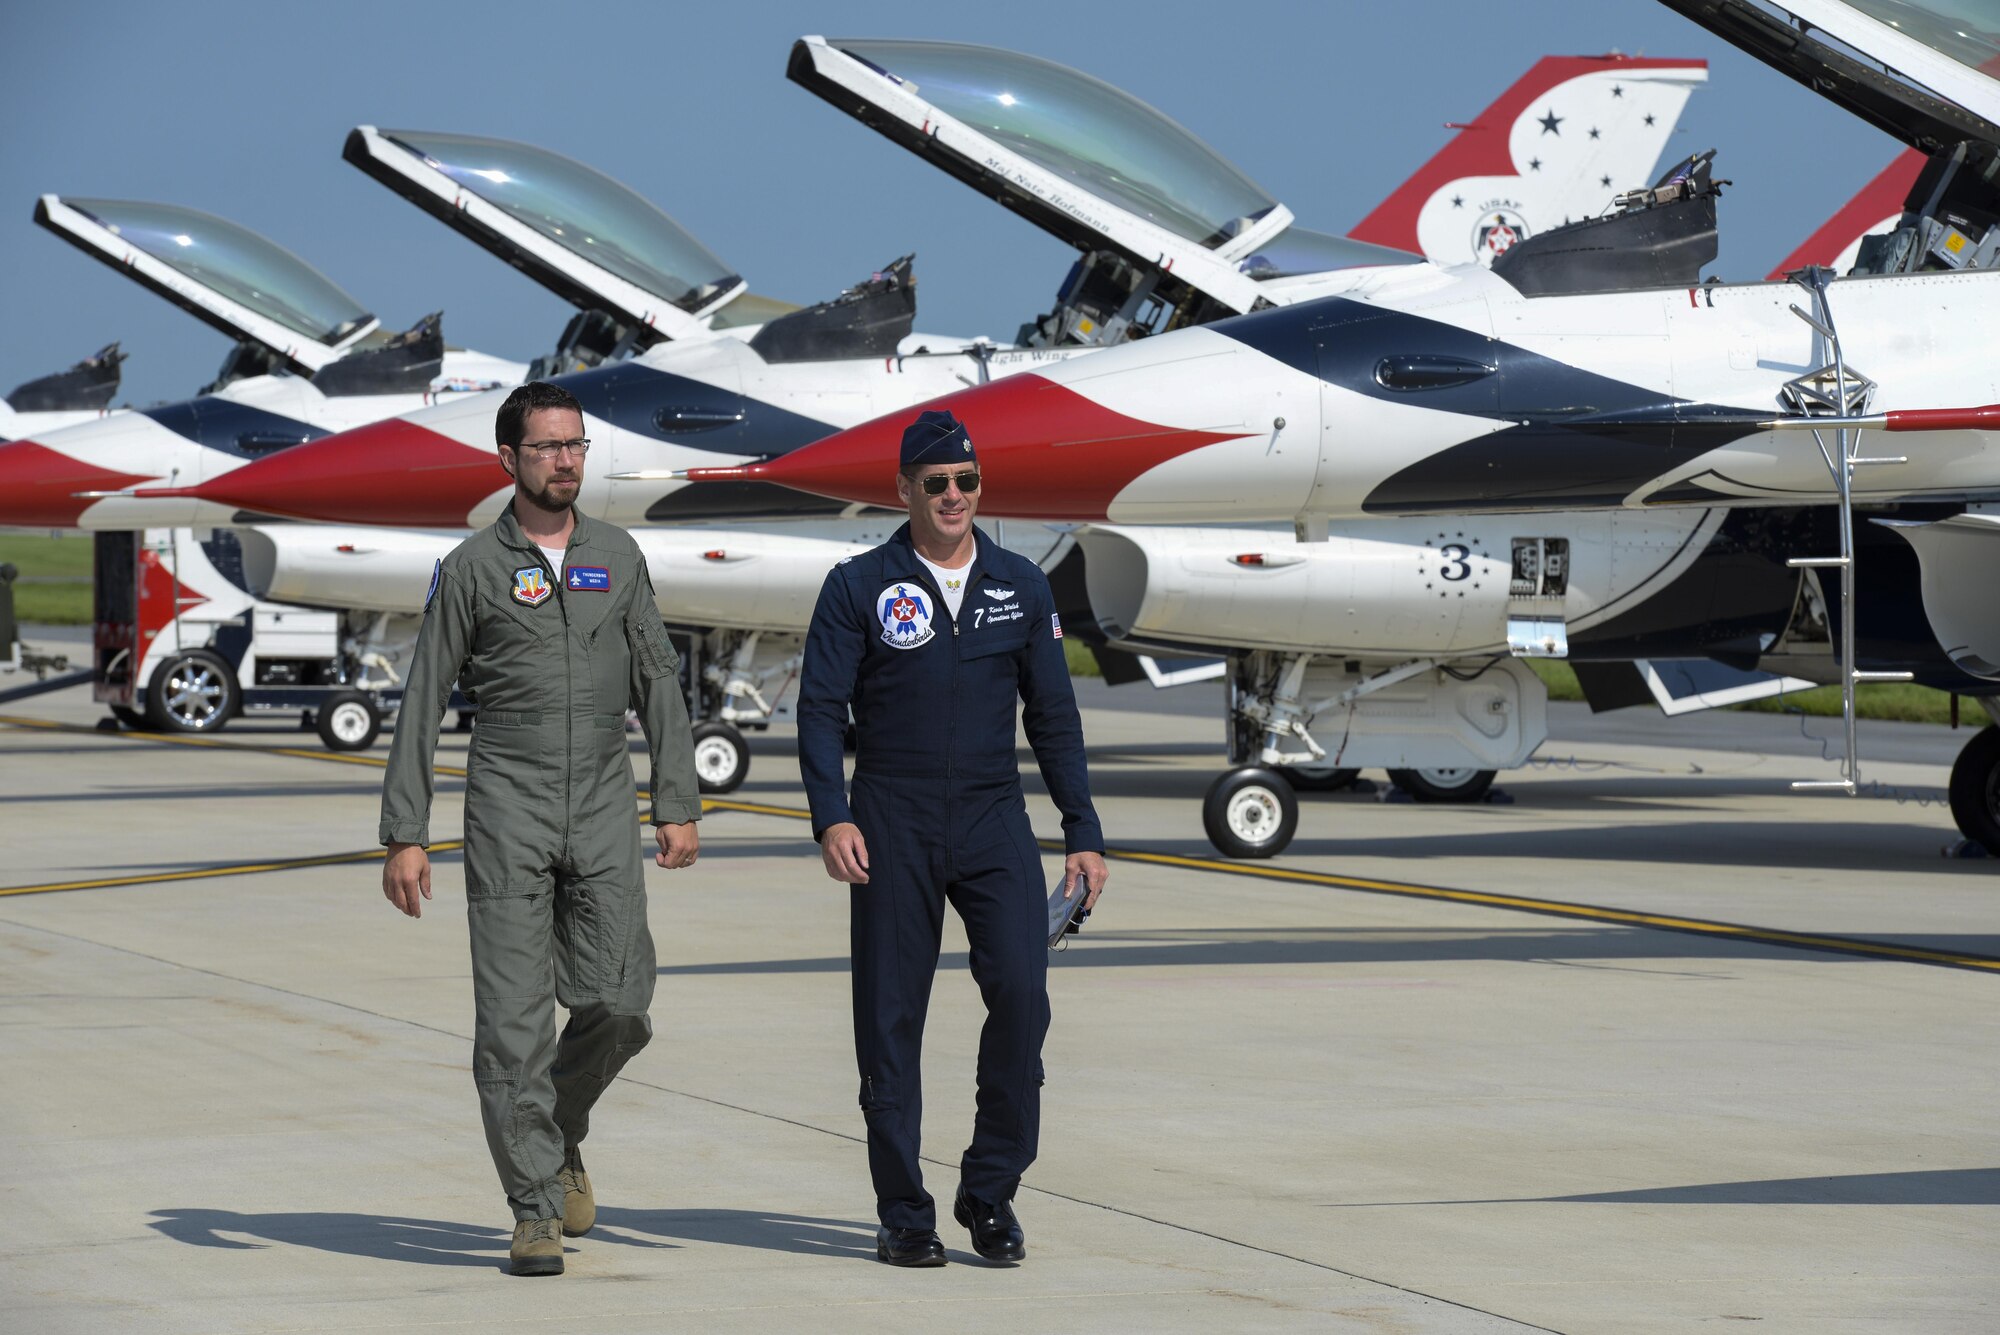 Andrew Jackson (left), radio host for 88.7 The Bridge, and Lt. Col. Kevin Walsh, U.S.A.F. Thunderbirds operations officer, walk to the No. 7 jet for a media flight Aug. 25, 2017, during the Thunder Over Dover Open House Family Day at Dover Air Force Base, Del. The Thunderbirds have performed for millions of fans since 1953, and are scheduled to complete nearly 70 performances this year. (U.S. Air Force photo by Staff Sgt. Aaron J. Jenne)